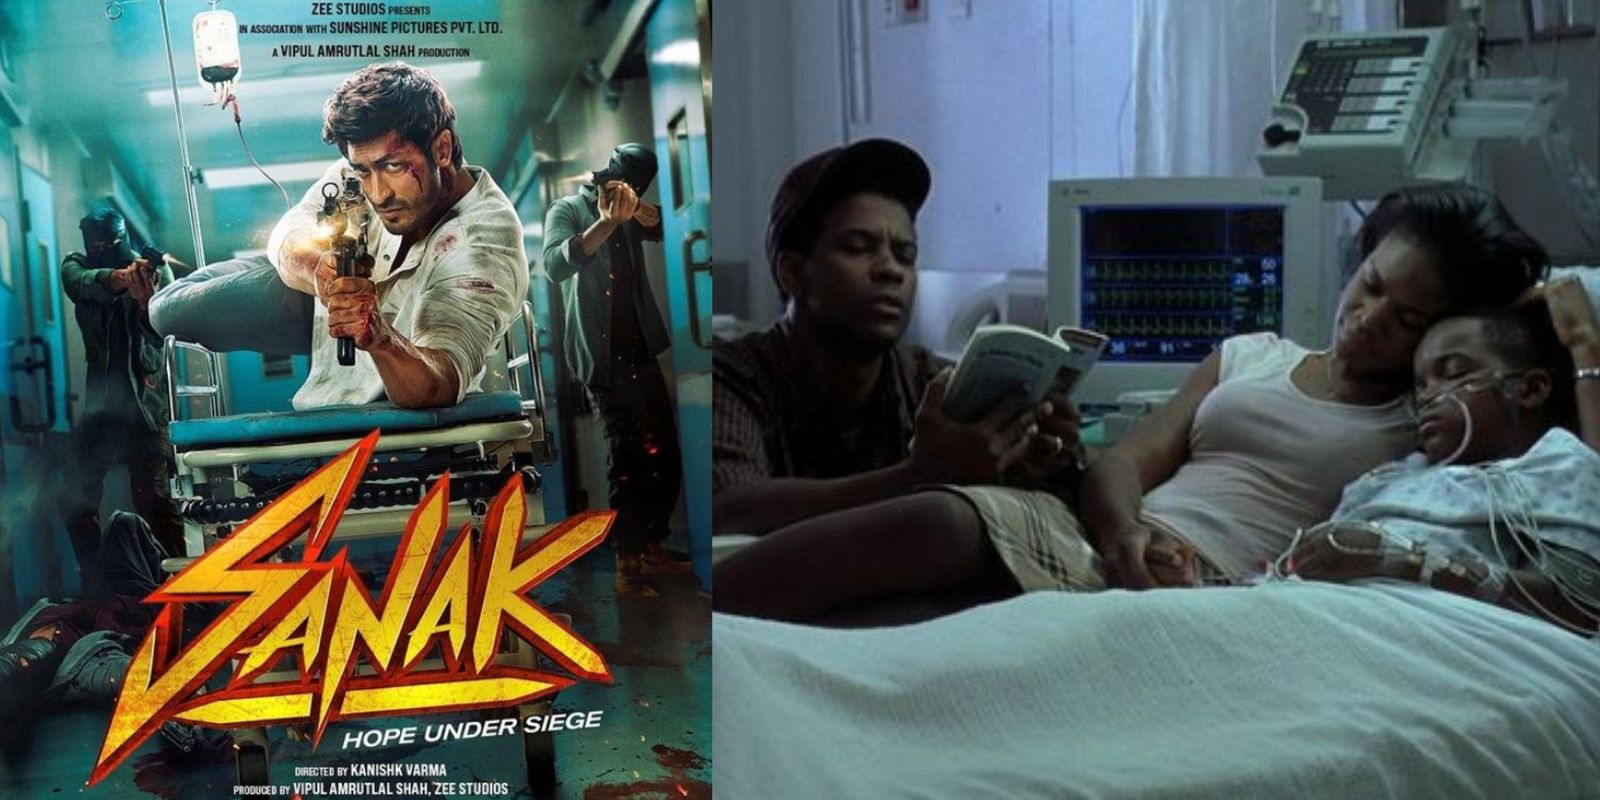 Sanak: Vidyut Jammwal To Reprise The Role Of Denzel Washington, Film To Be A Remake Of John Q?